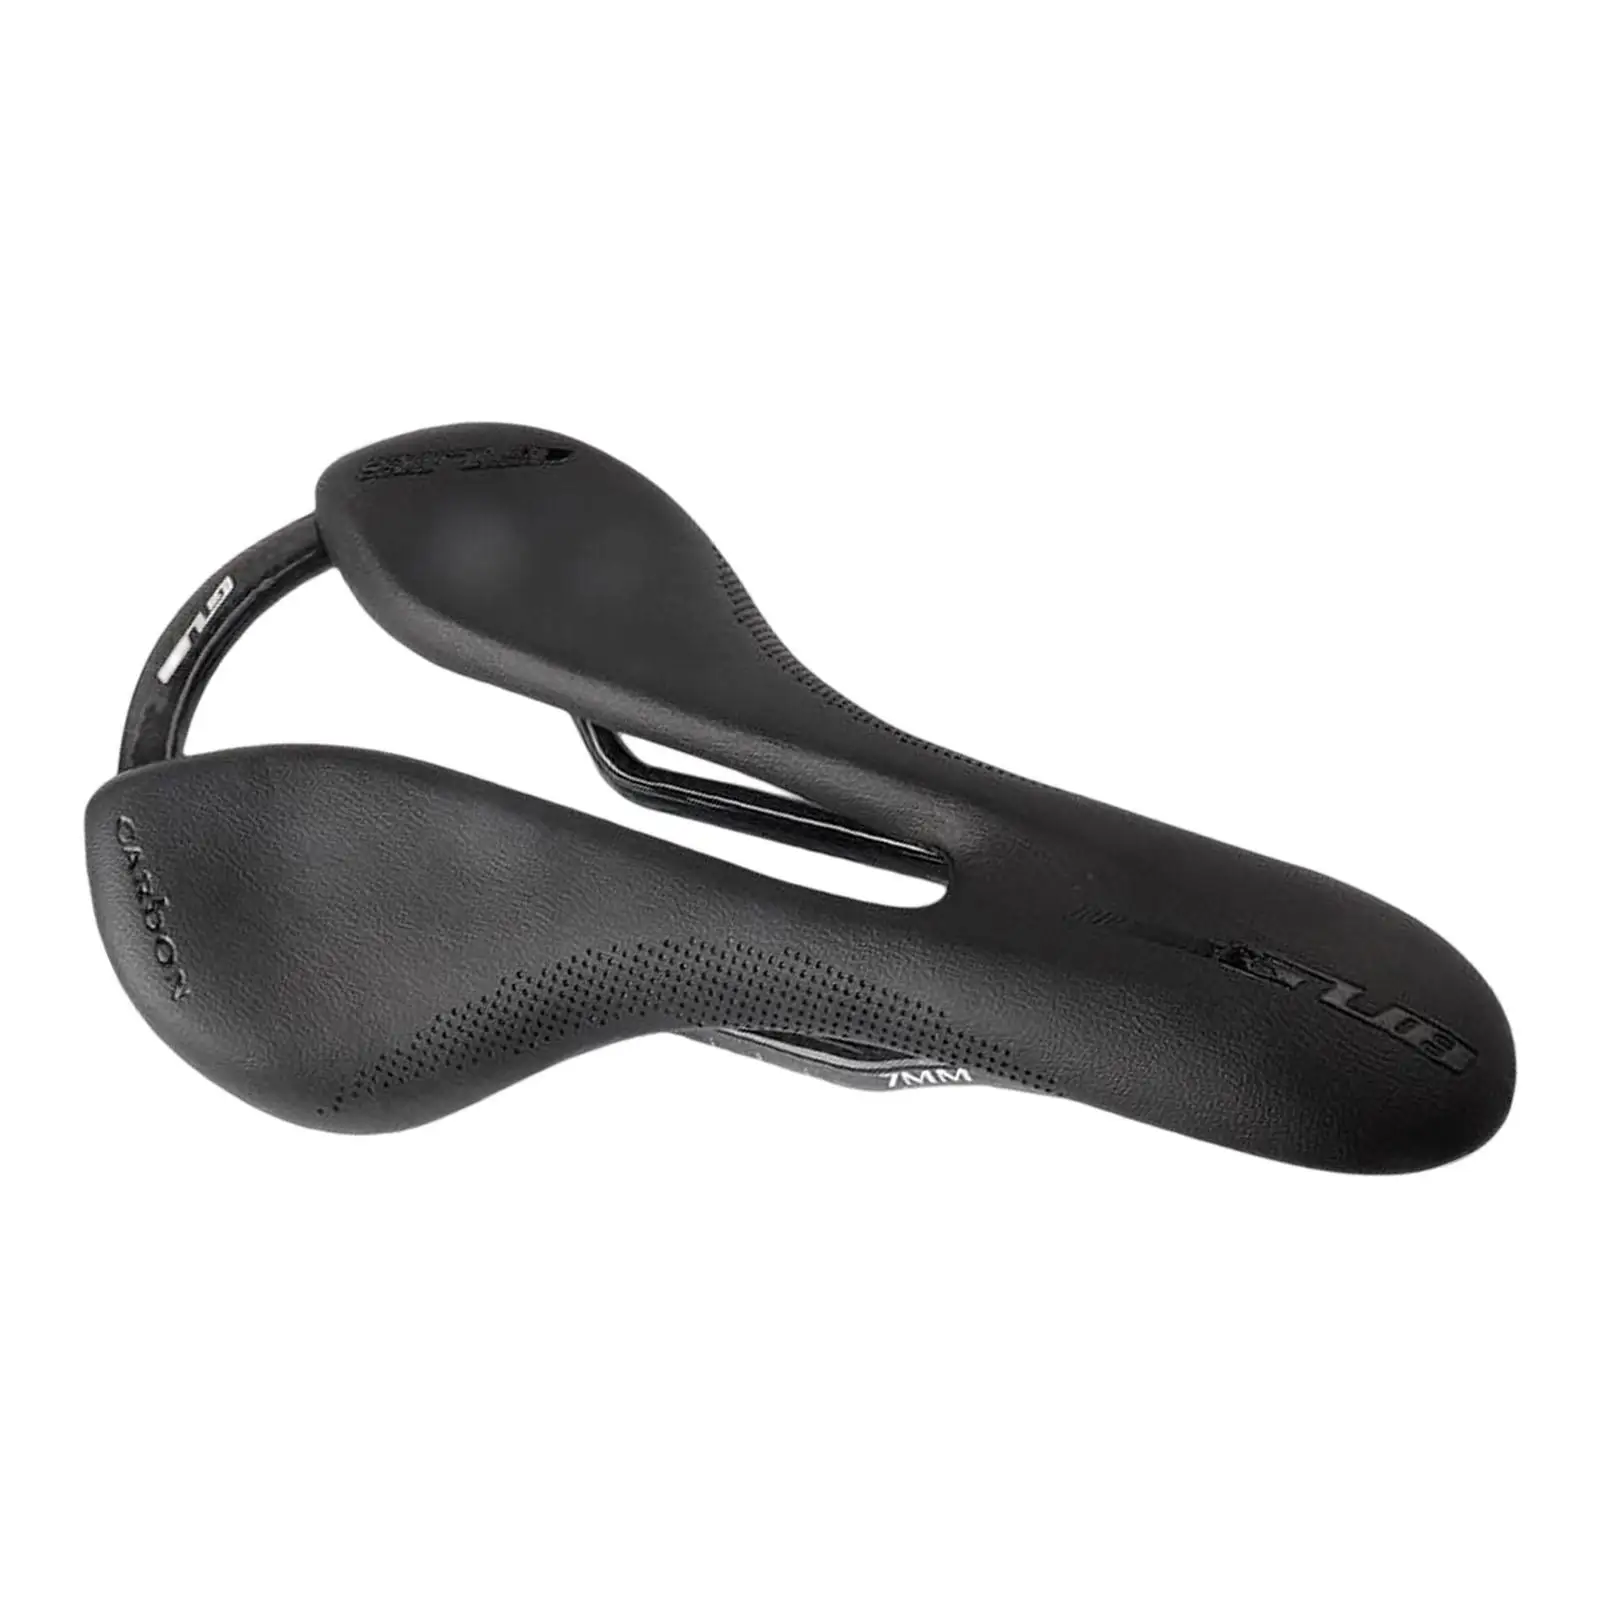 Universal Bike Saddle Carbon Fiber cushion PU Leather Black Breathable for Replacement Racing Outdoor Mountain Bike